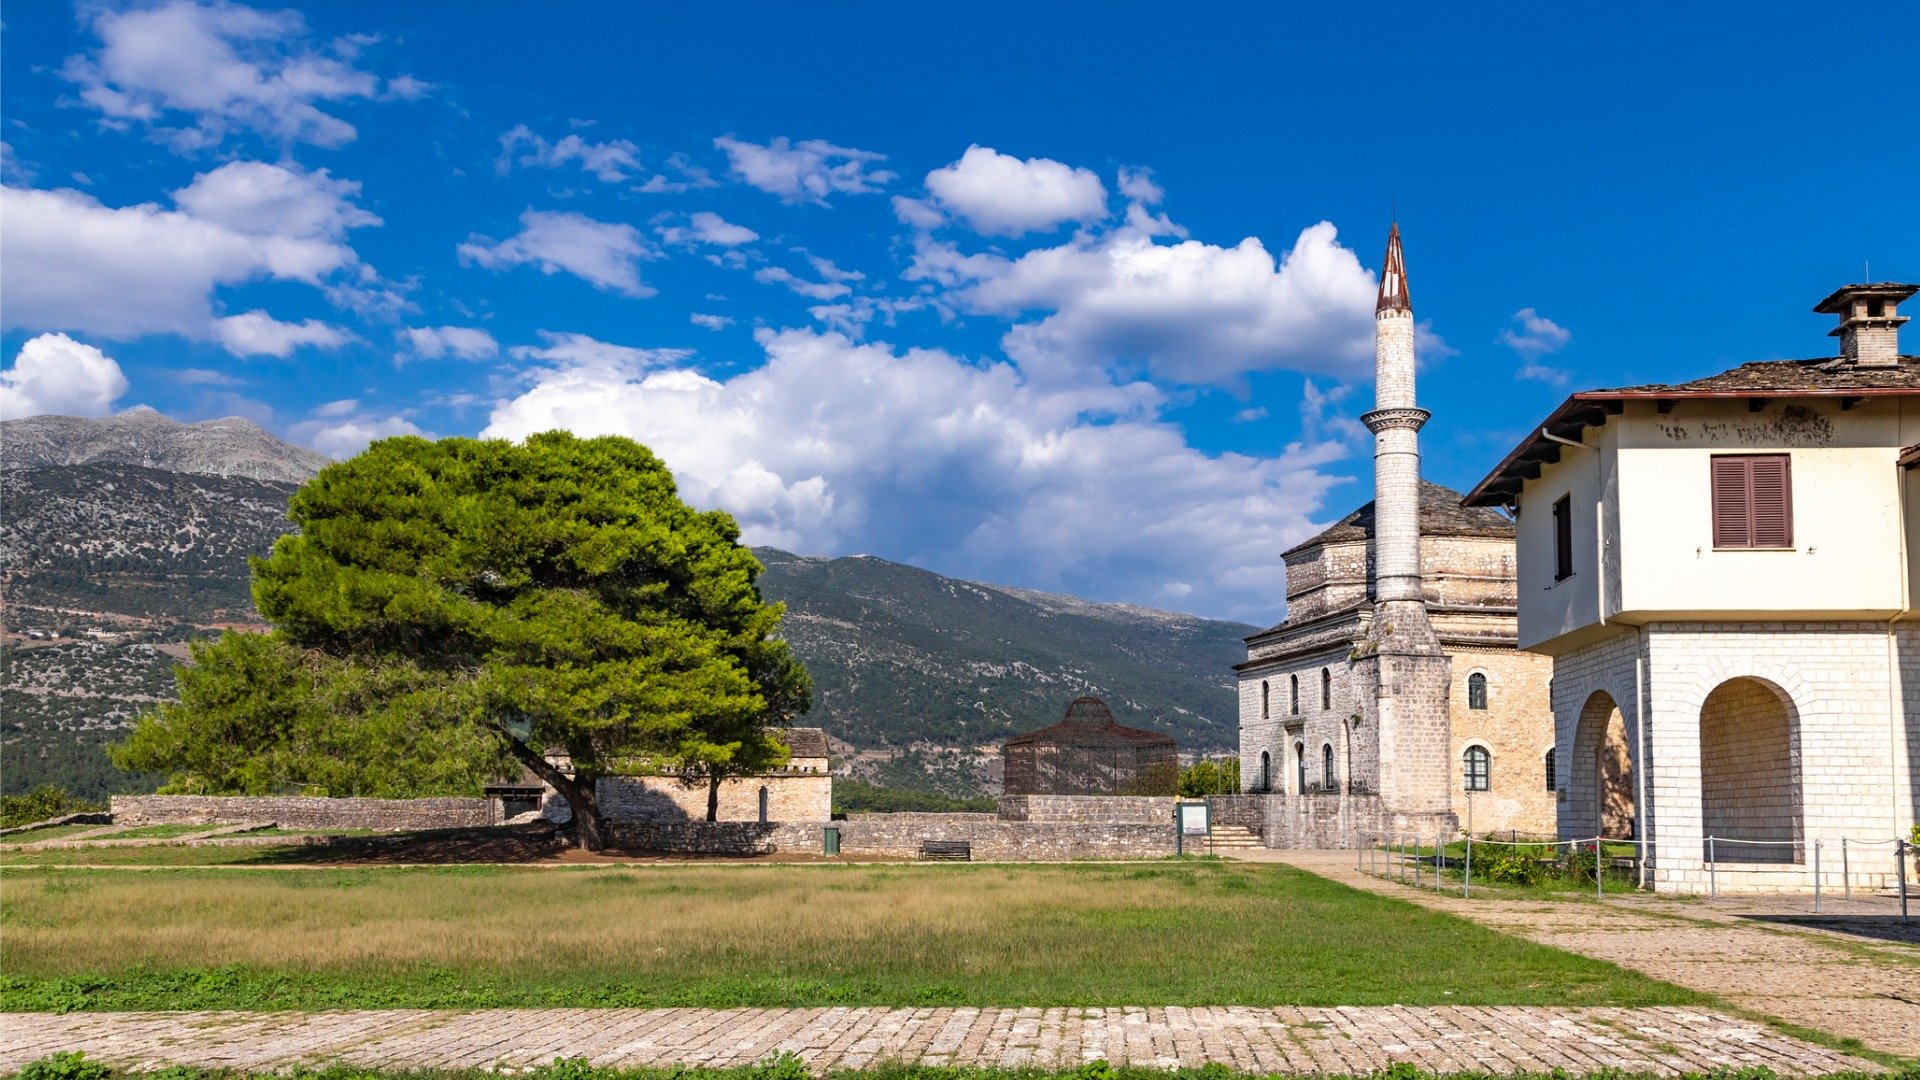 This image shows a mosque and a traditional Epirus building, both within the grounds of the Castle of Ioannina. 